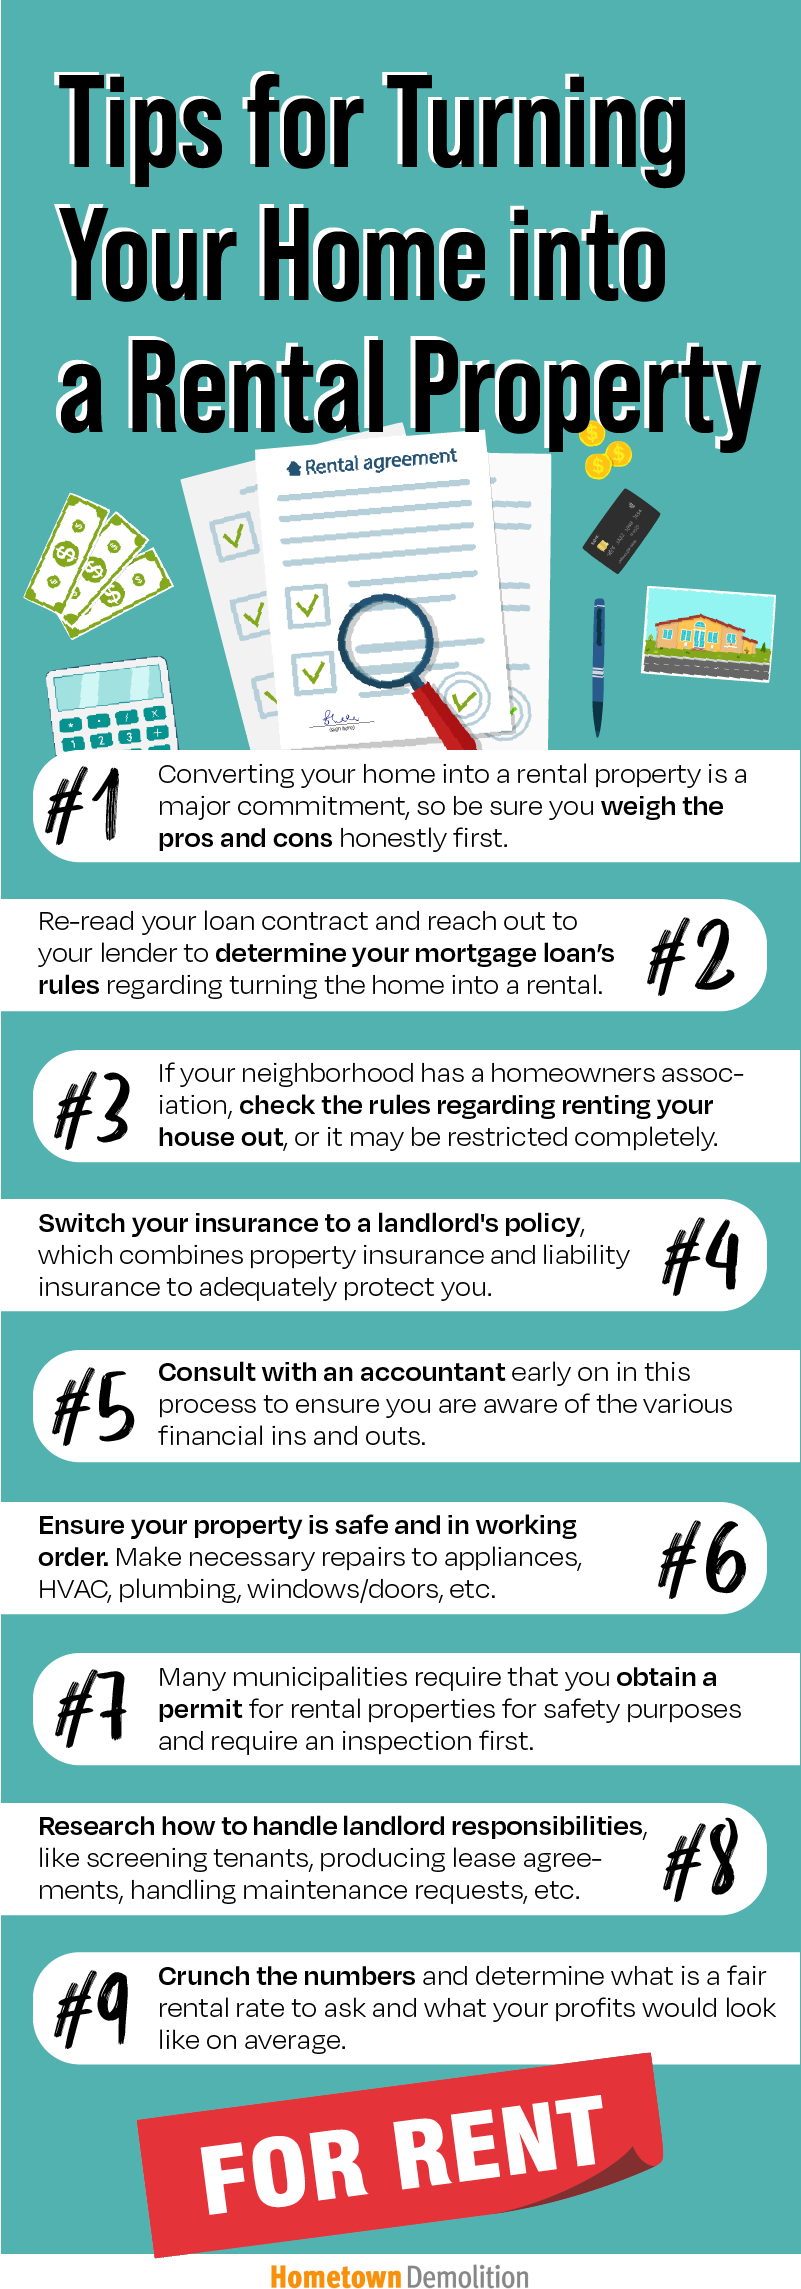 tips for turning home to rental property infographic